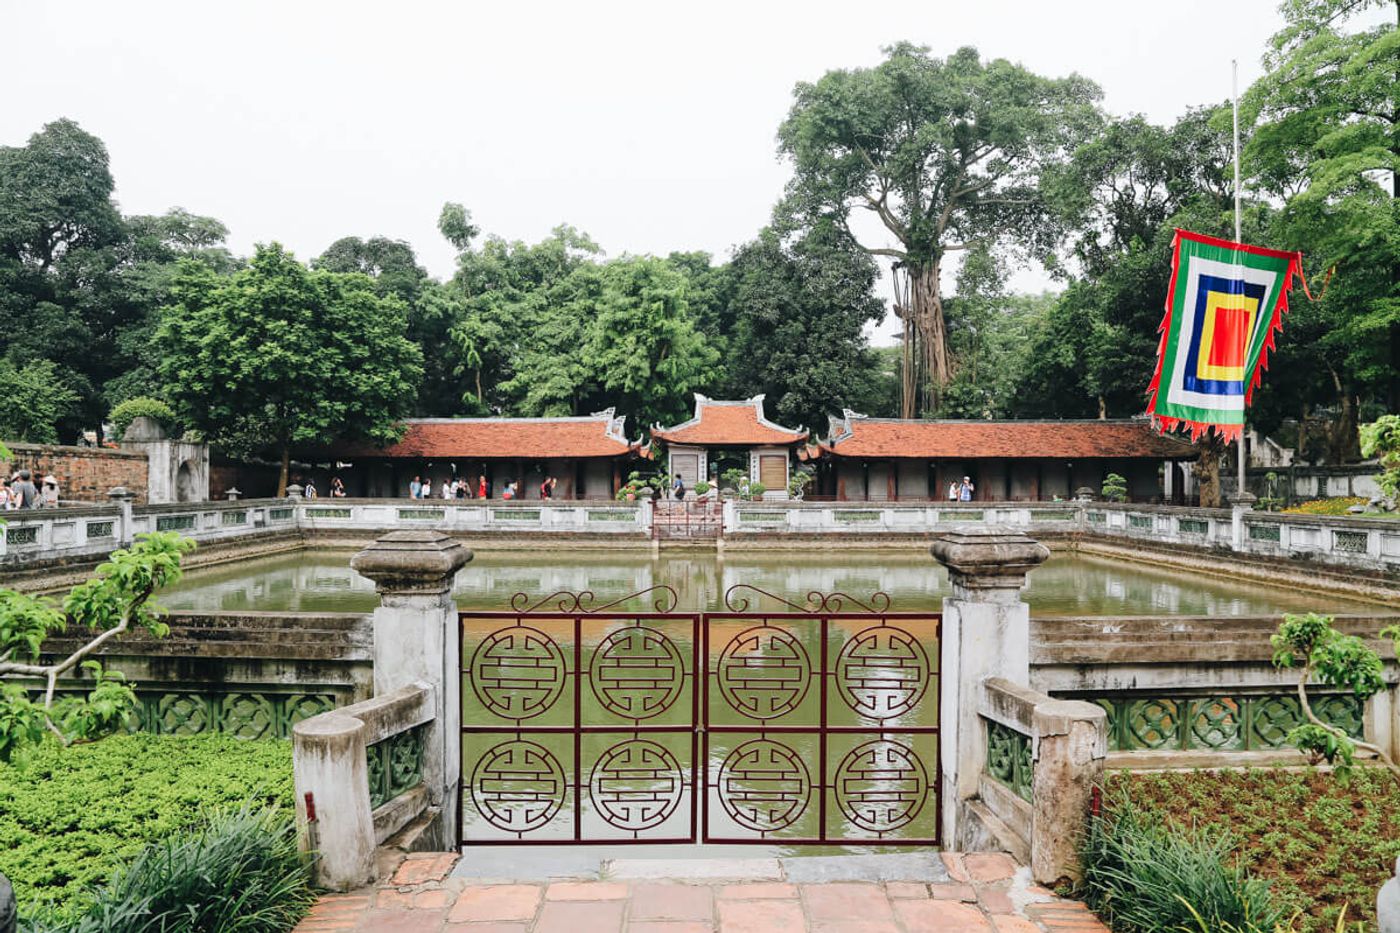 Take a tour in Temple of Literature